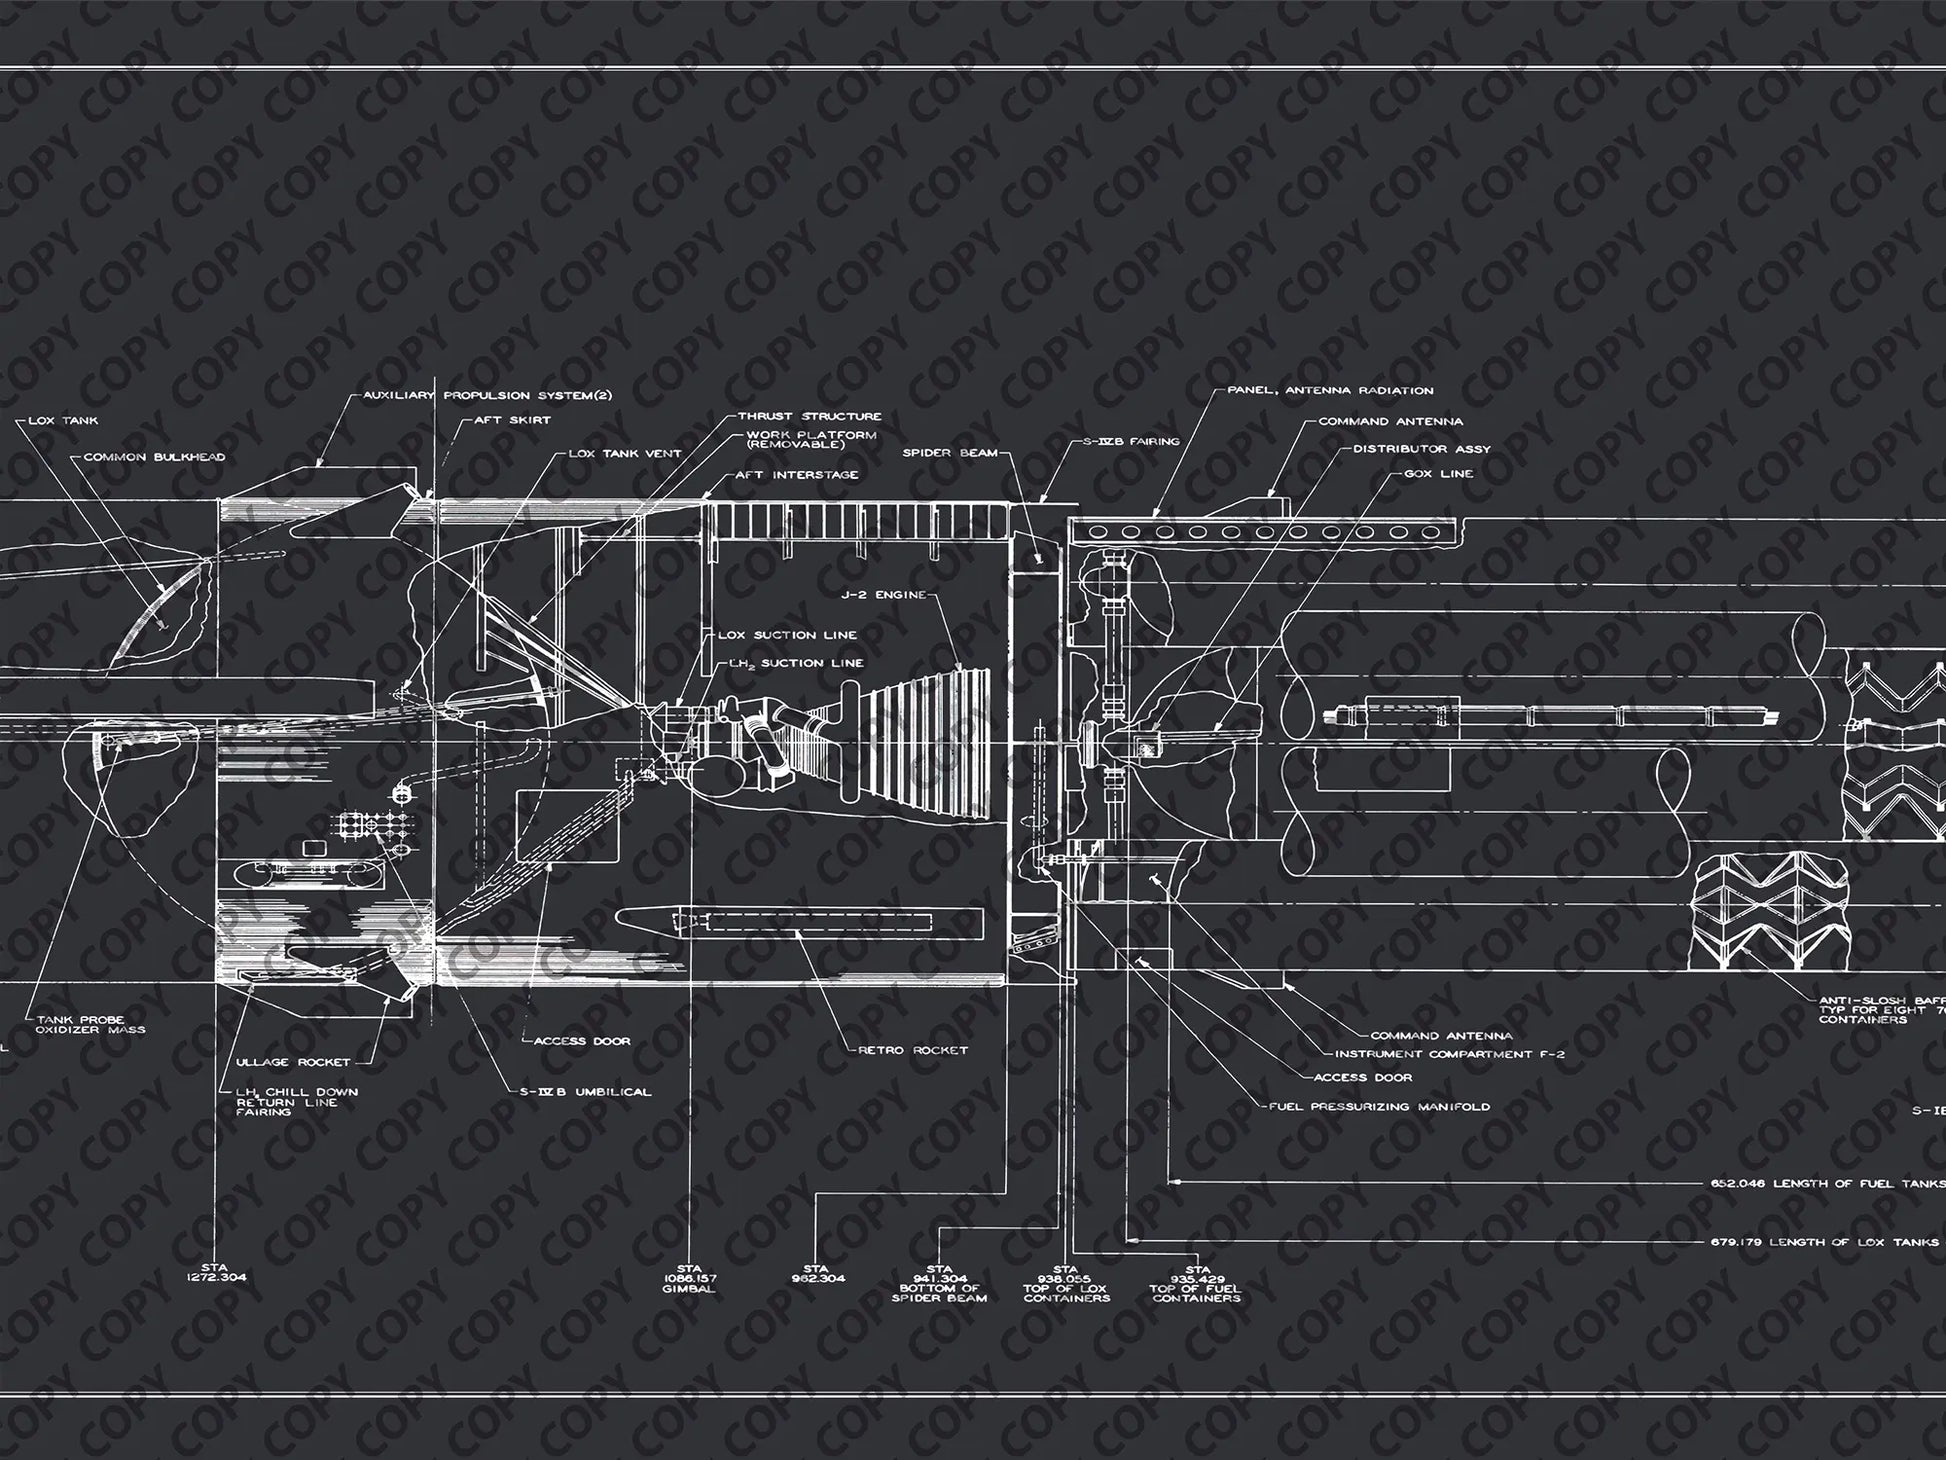 Apollo Saturn Blueprint | NASA posters | Technical blueprint Diagram | A detailed section of the NASA Saturn IB rocket blueprint, showing technical schematics with various labeled components including the auxiliary propulsion systems, J-2 engine, and fuel pressurizing manifold against a dark background.